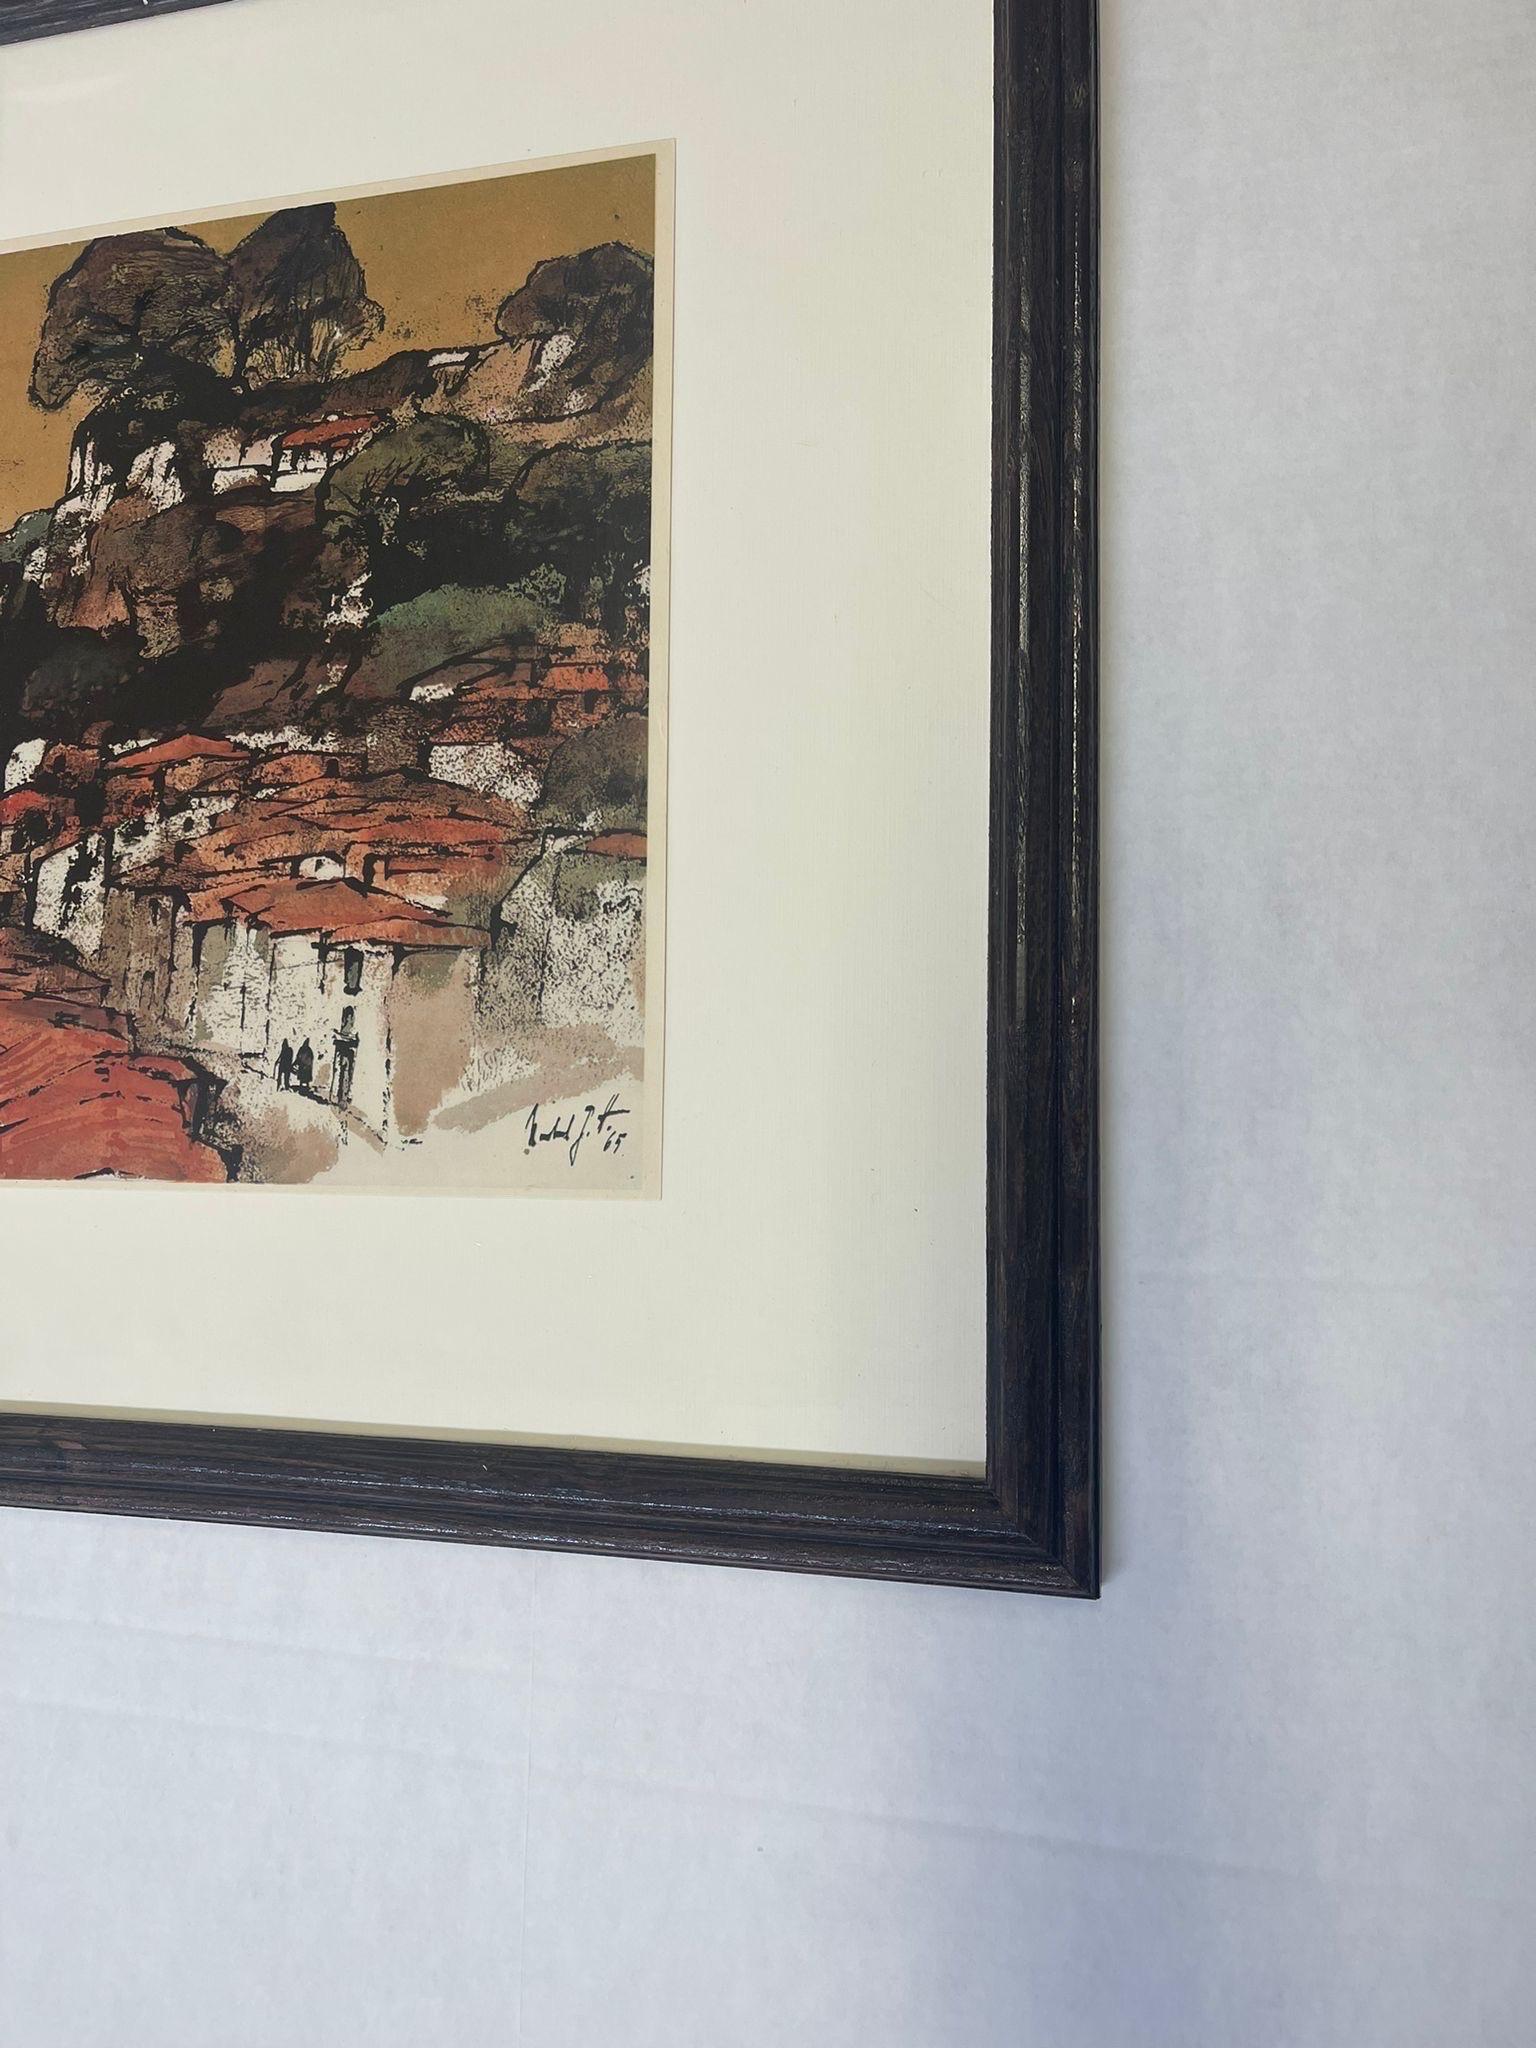 Wood Vintage Framed and Signed Art Print “Mountain Village in Portugal” by Hartmann For Sale